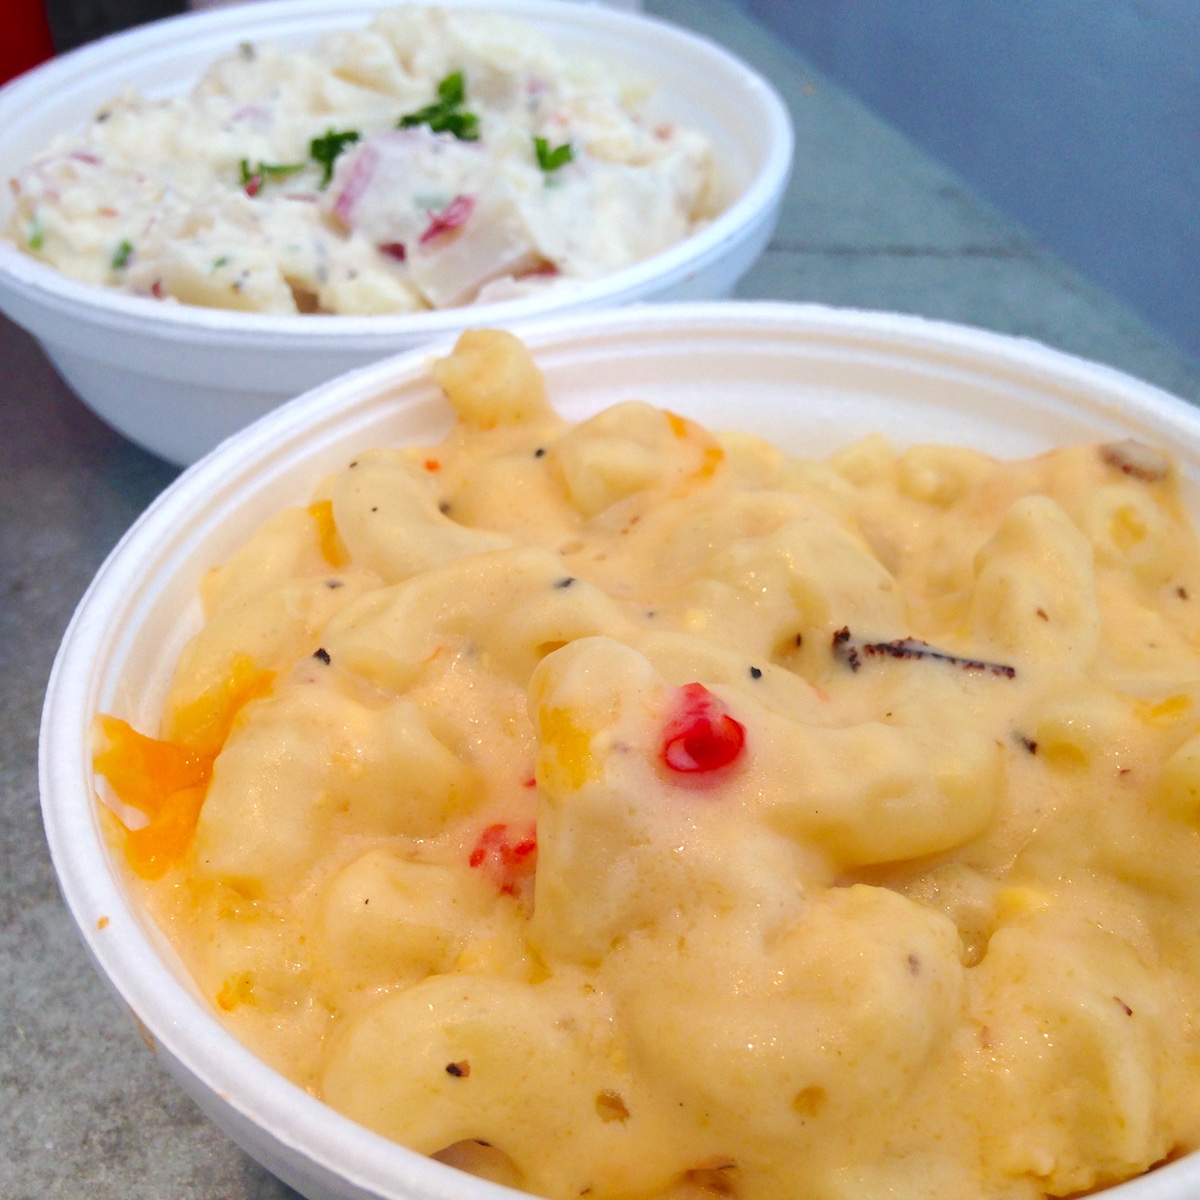 Pimento Mac and Cheese and Potato Salad from Hattie B's in Nashville, Tennessee